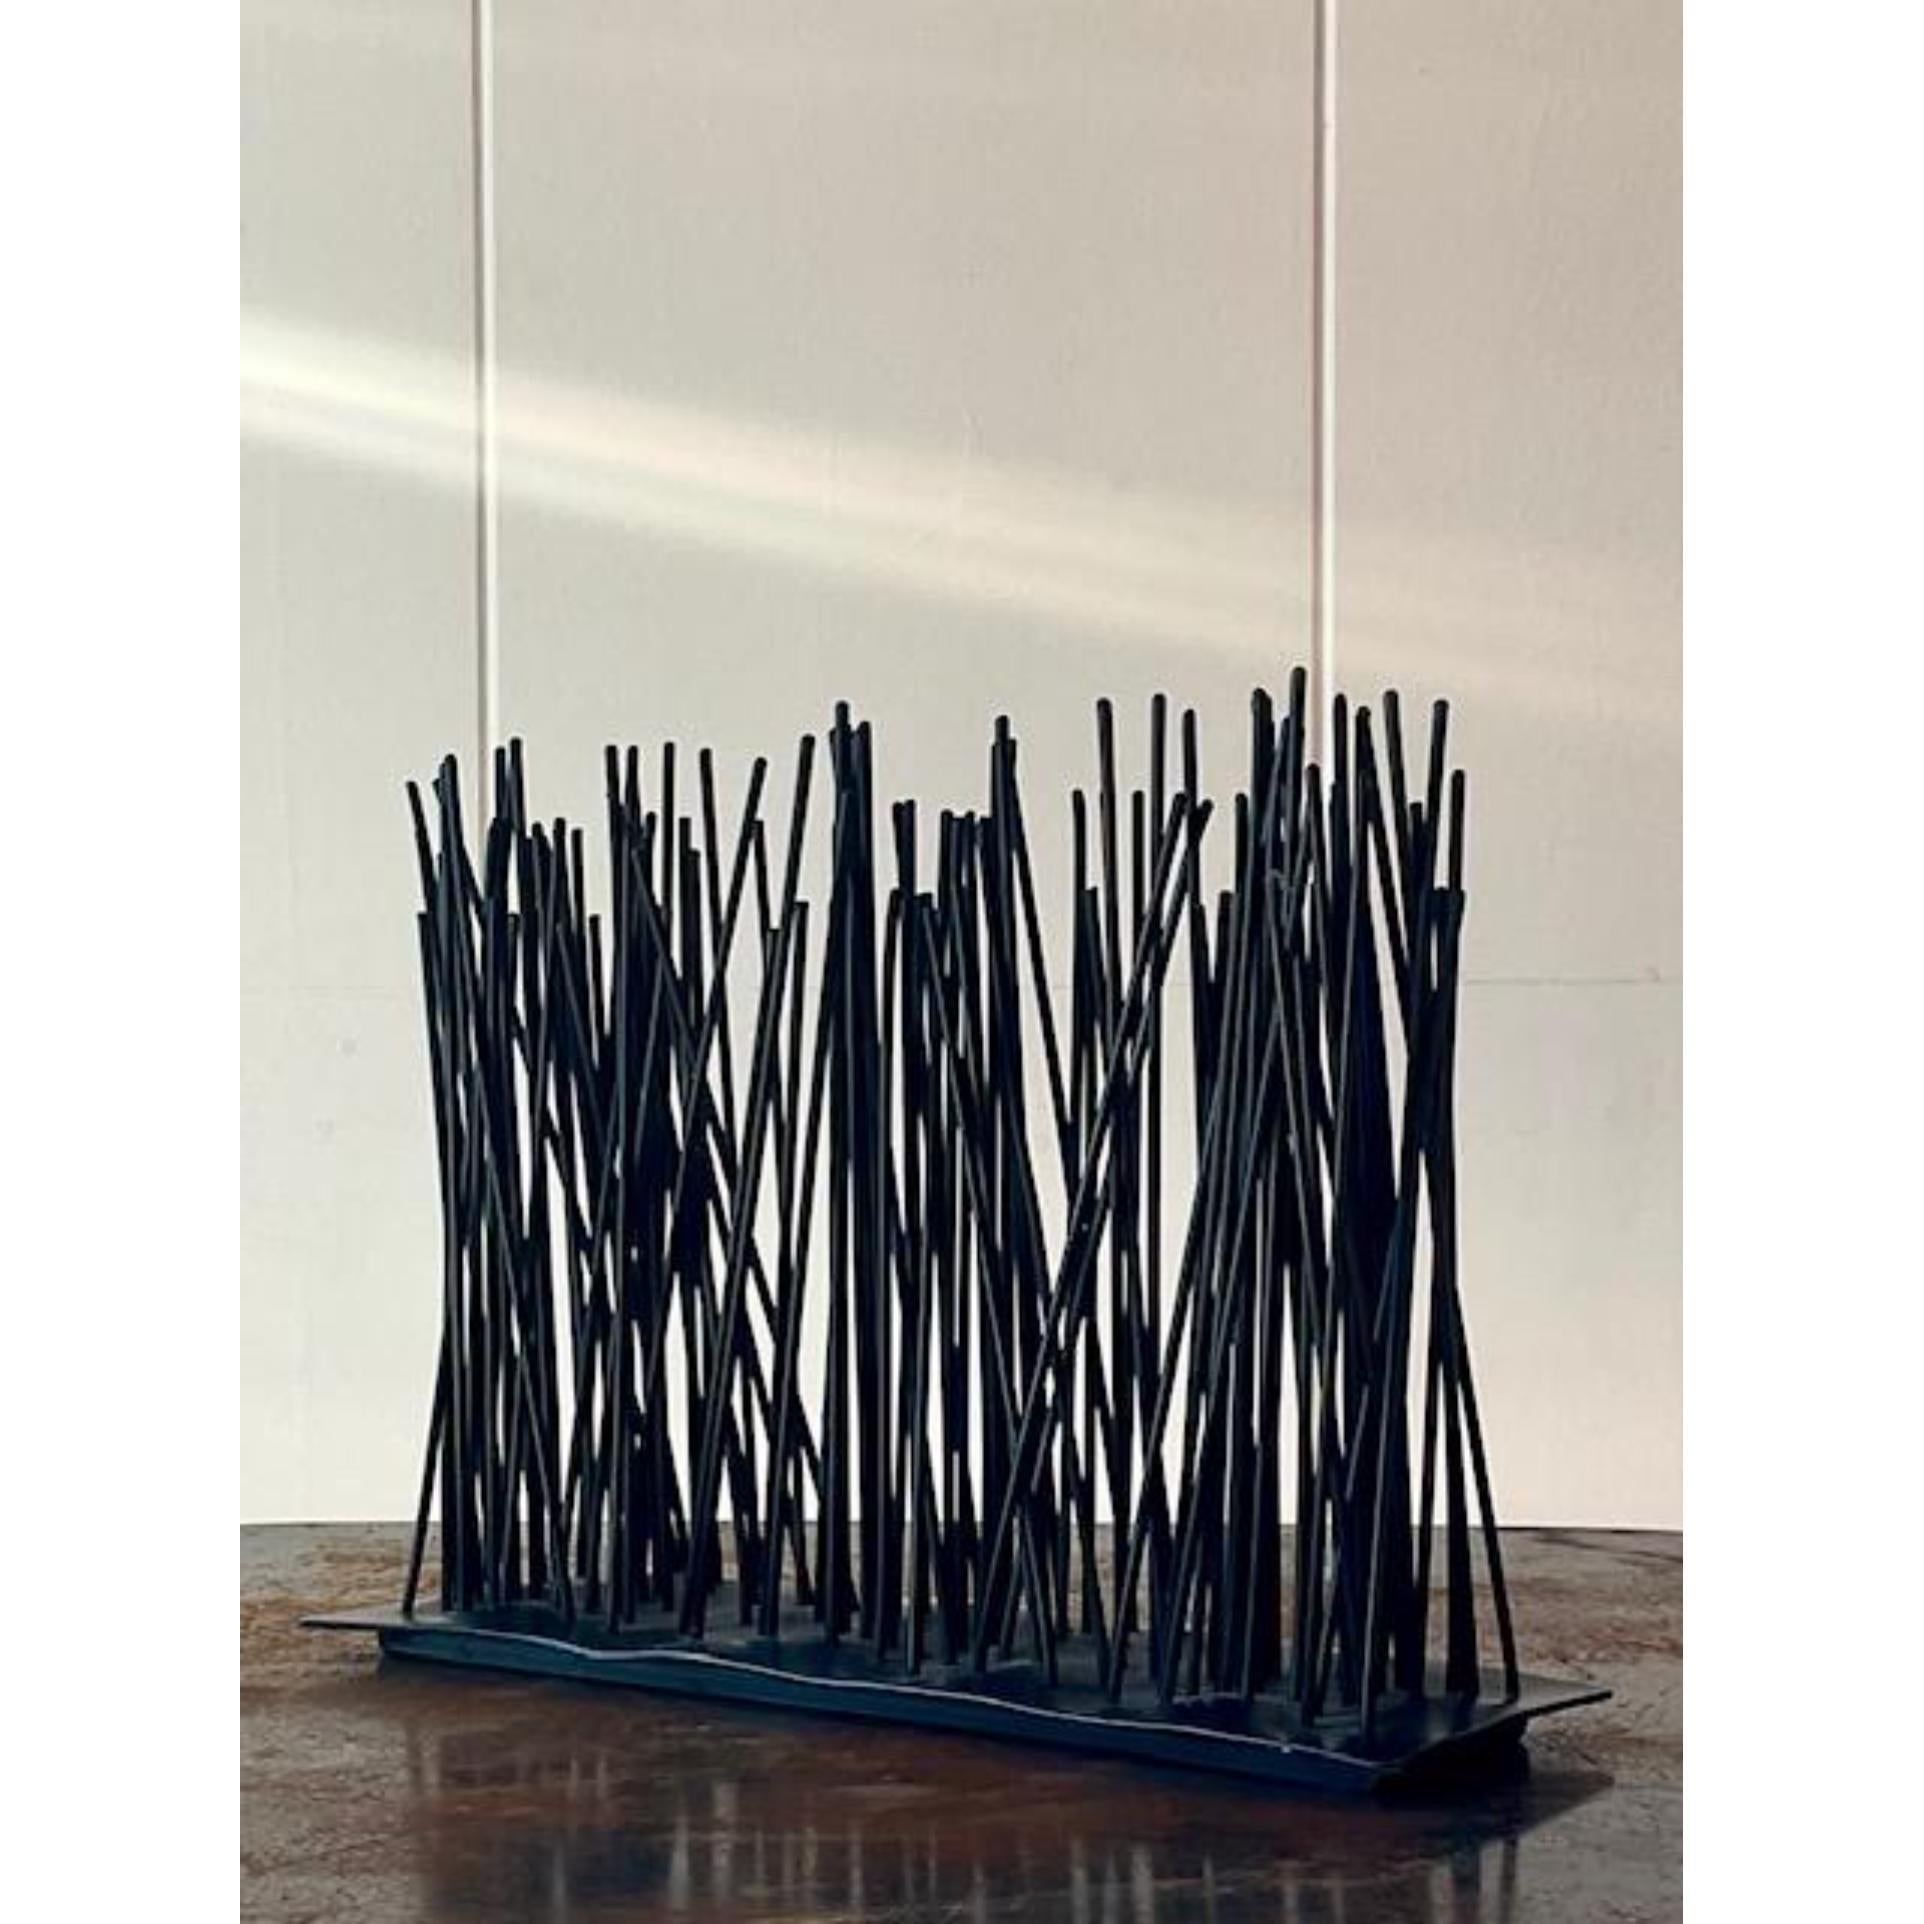 A fabulous vintage Boho metal sculpture. Made by the iconic Palecek group and tagged on the bottom. A chic Abstract composition in a matte black finish. 